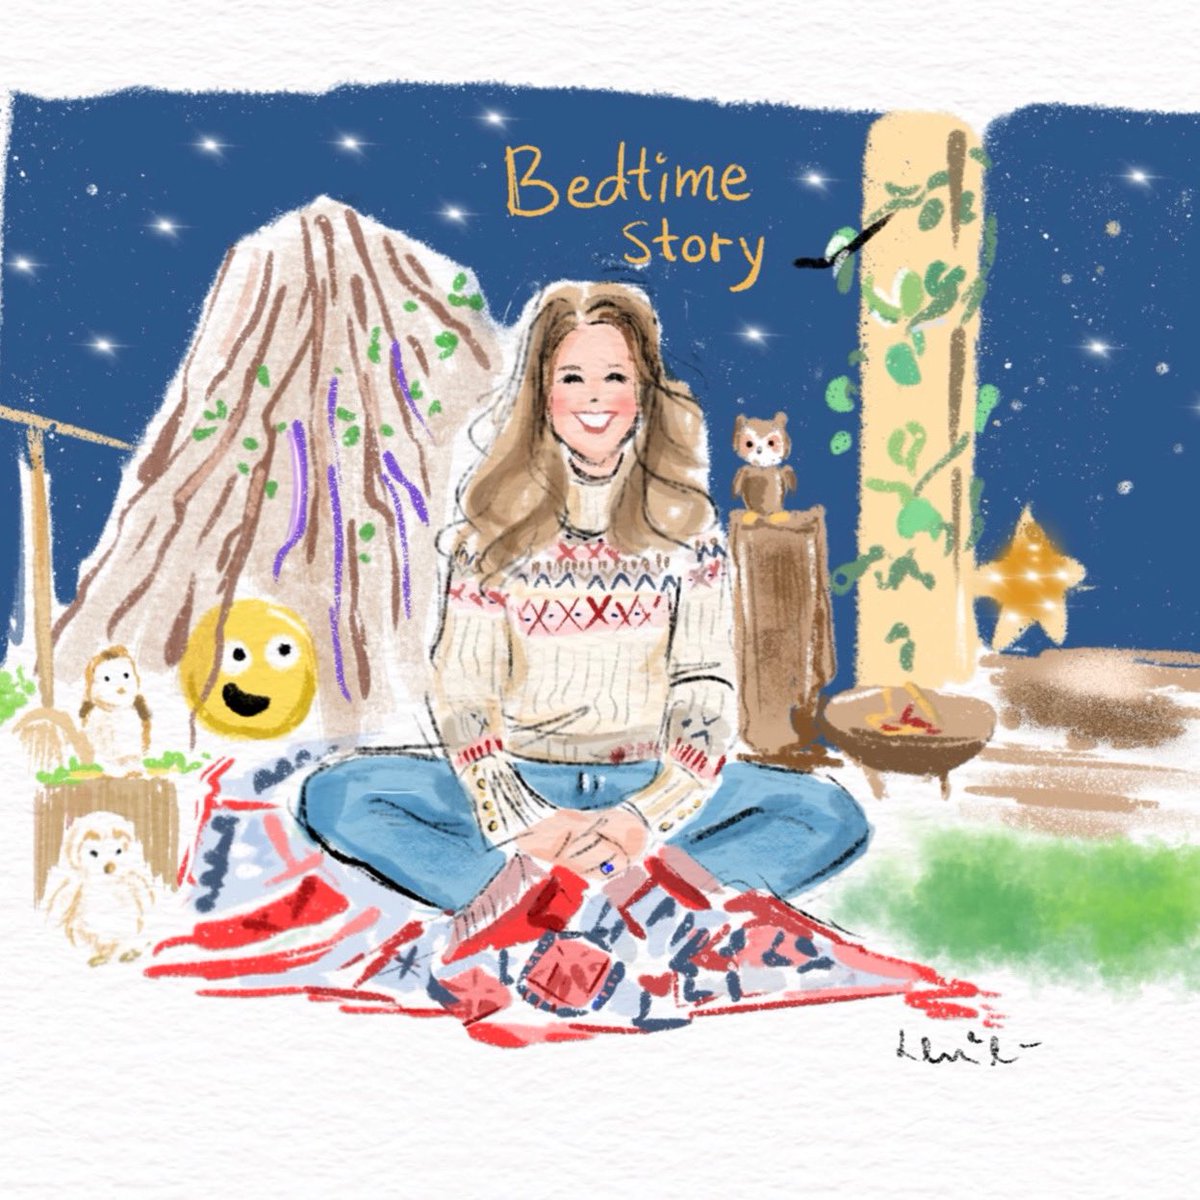 Duchess of Cambridge to make appearance on an episode of CBeebies Bedtime Story